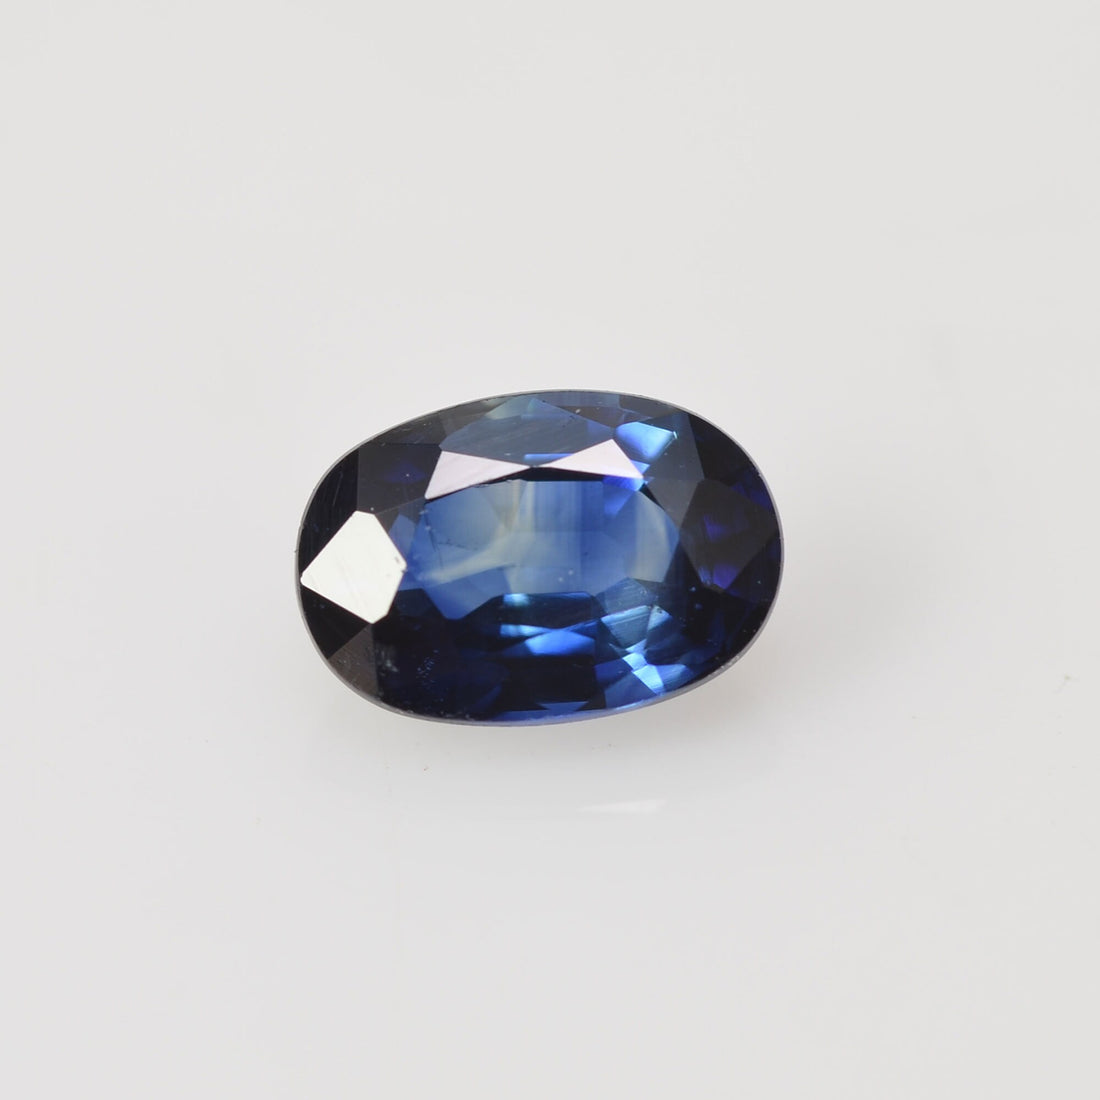 0.66 cts Natural Blue Sapphire Loose Gemstone Oval Cut